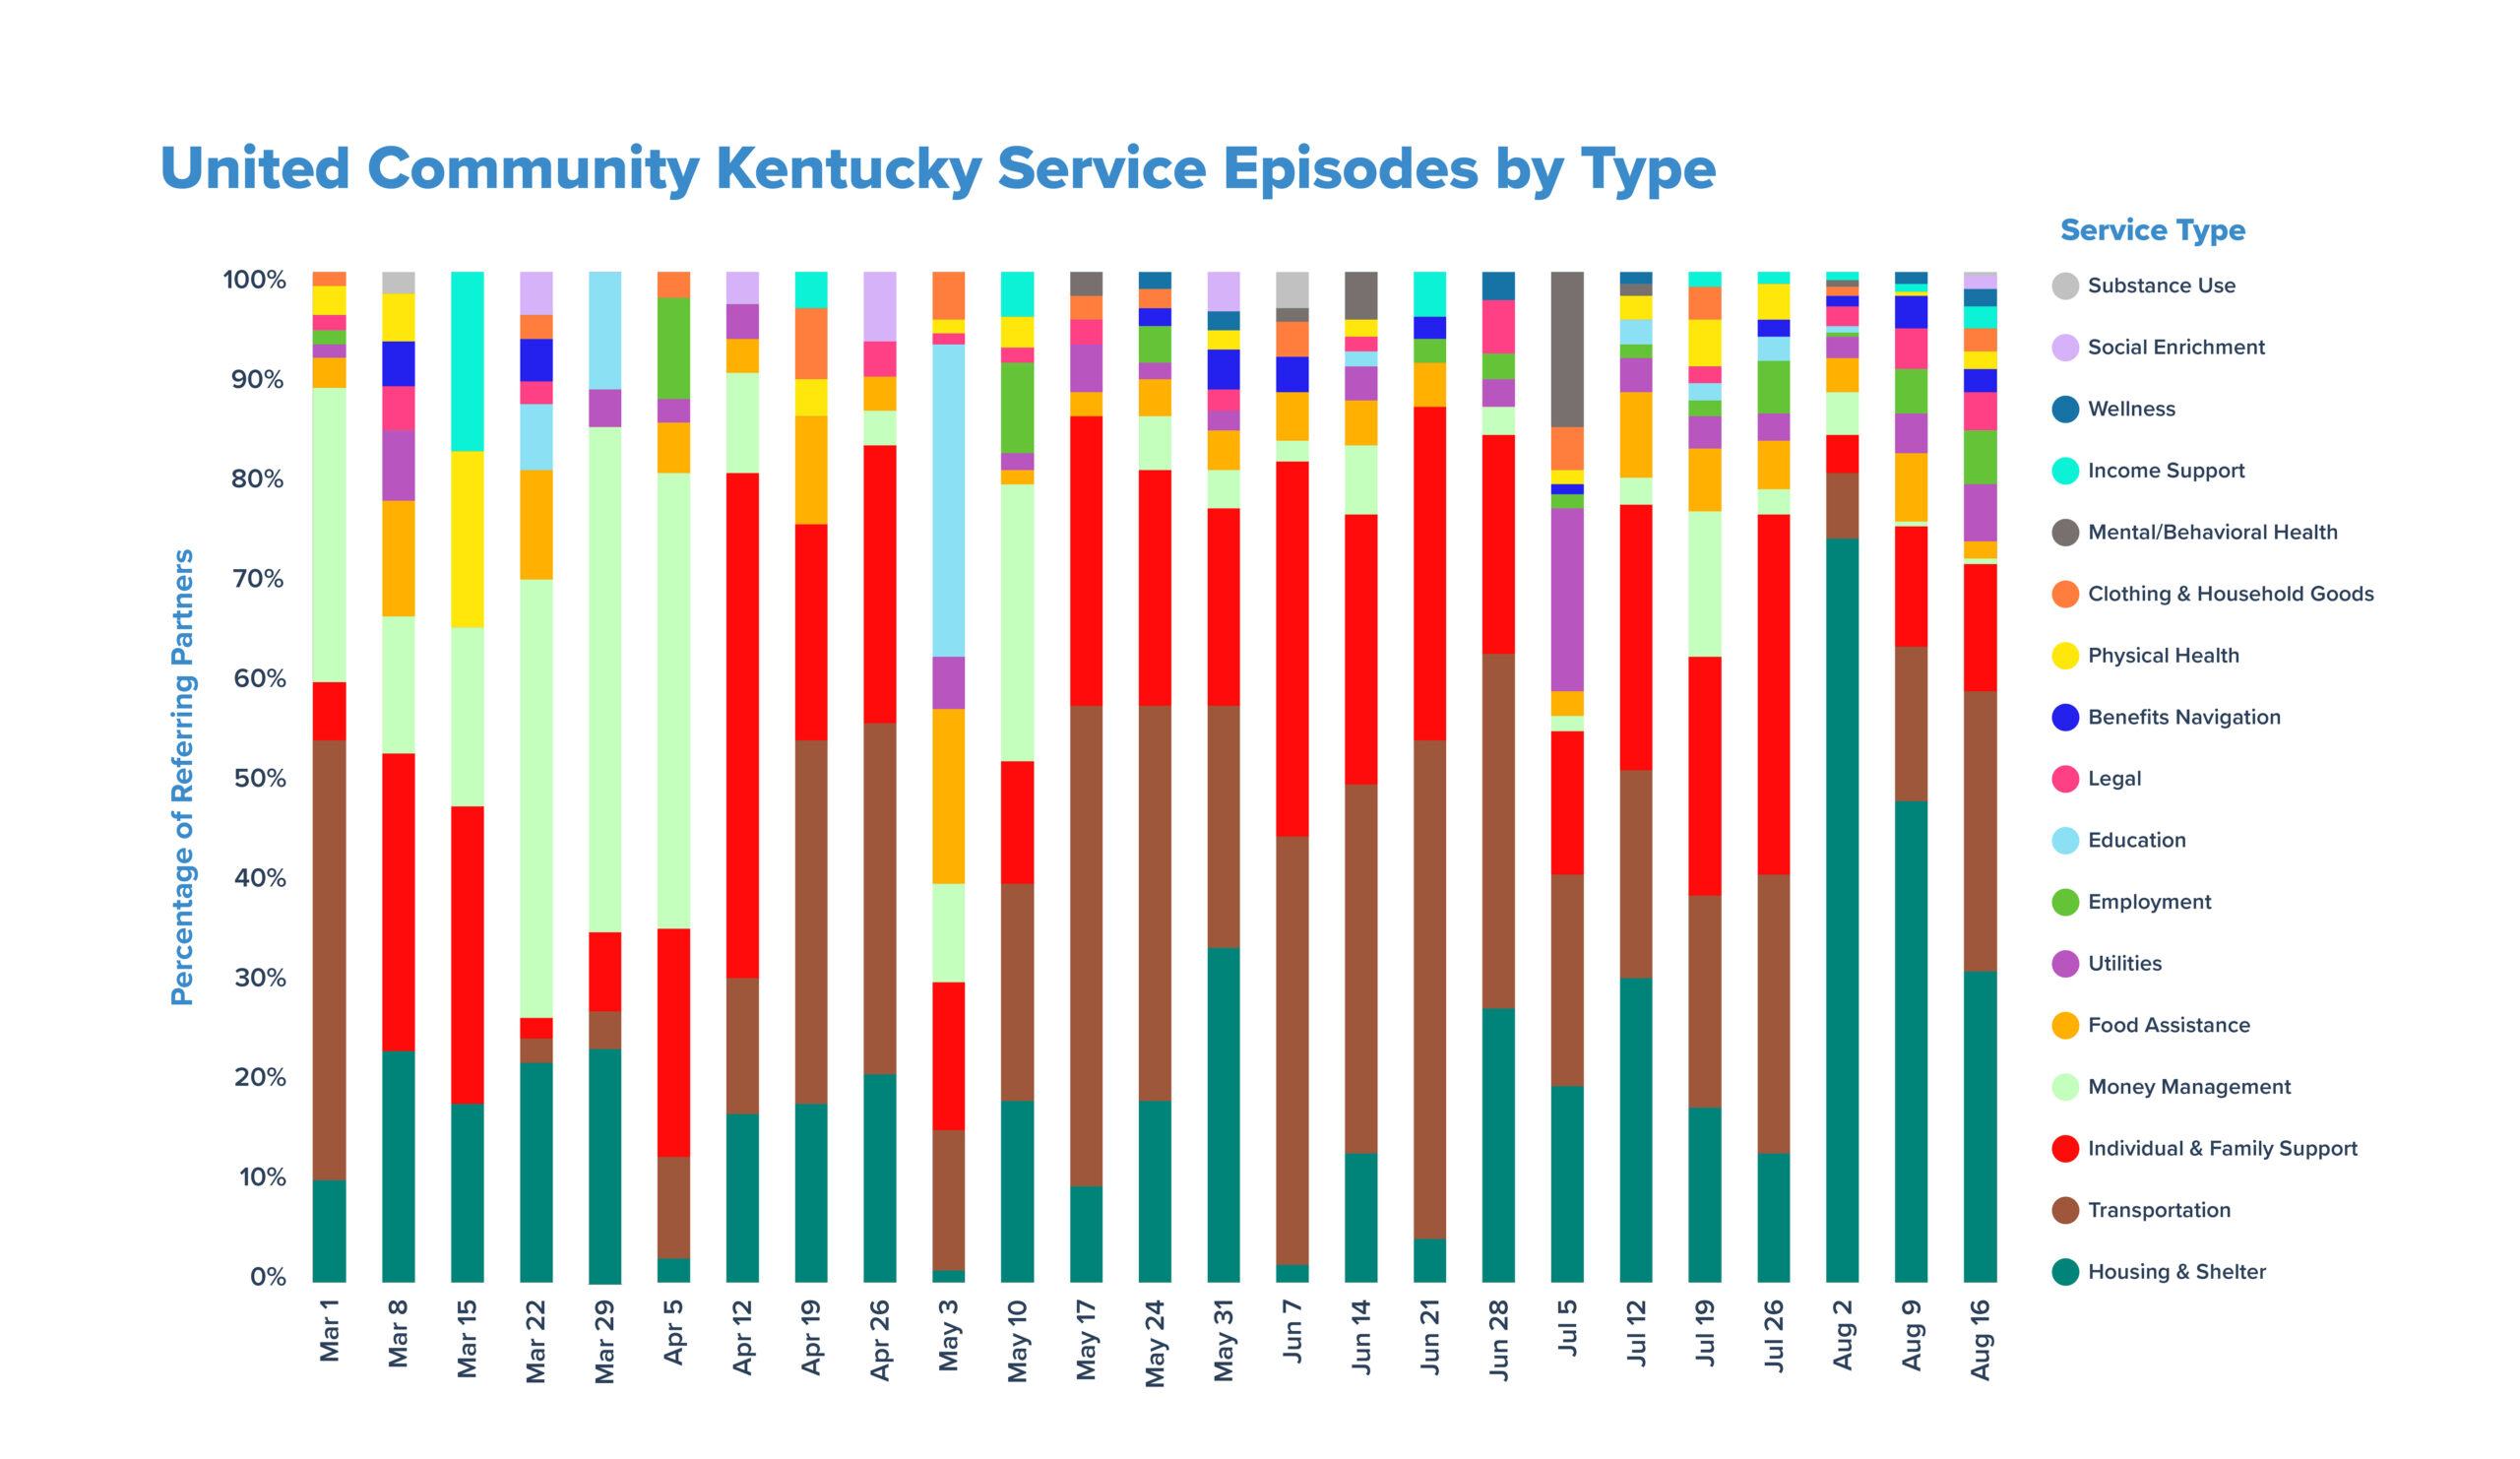 United Community Kentucky Service Episodes by Type